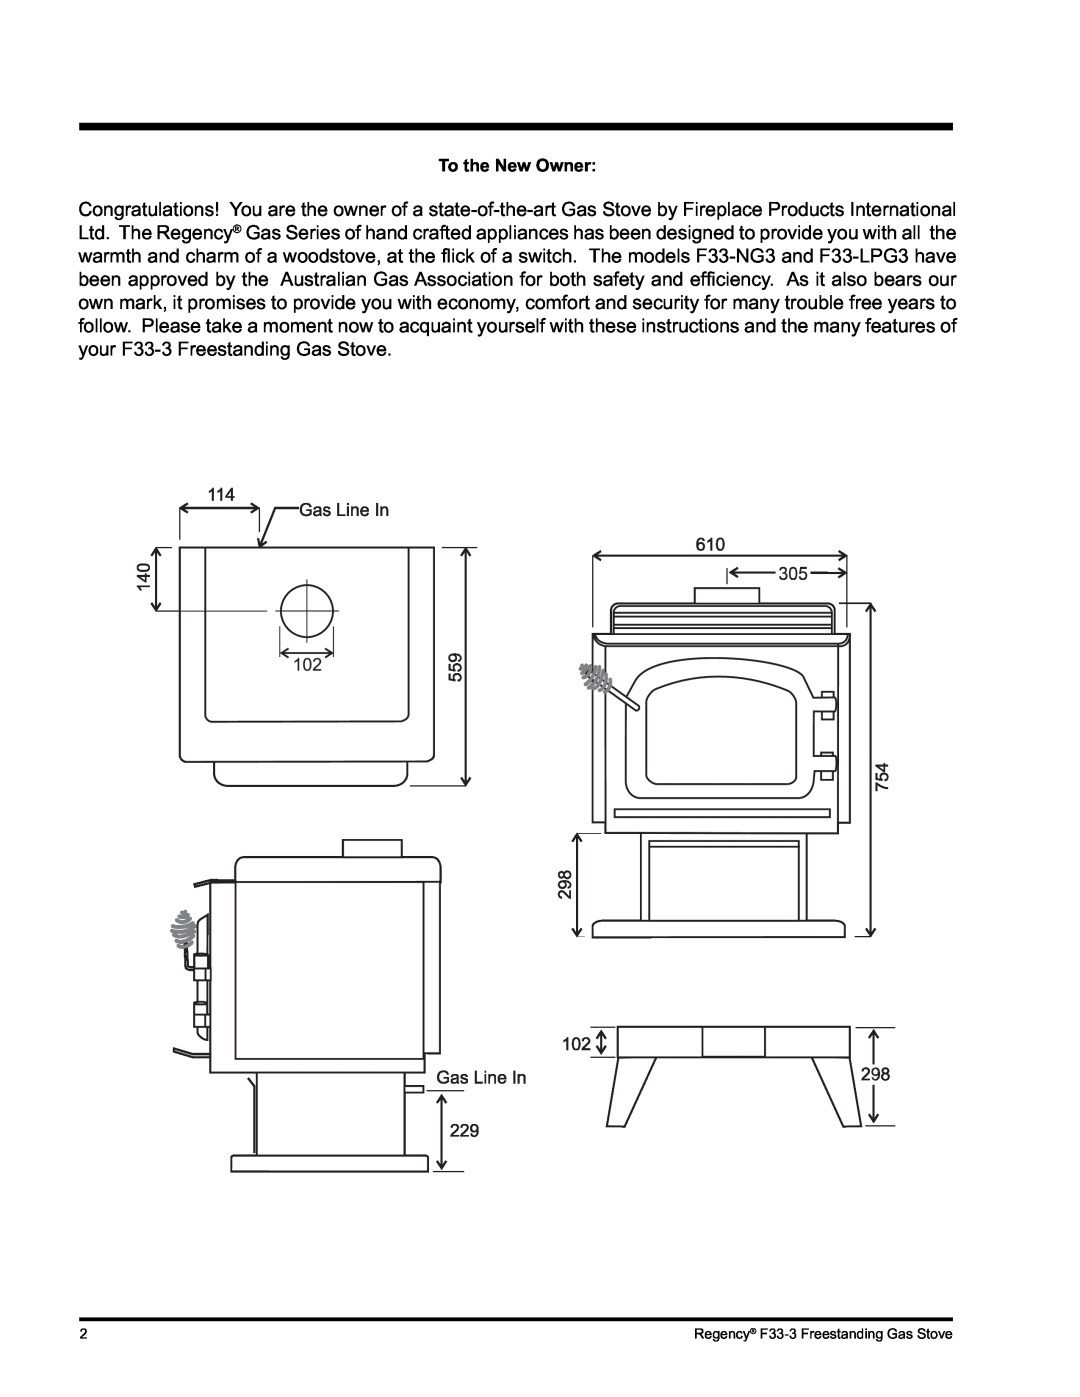 Regency Wraps installation manual To the New Owner, Regency F33-3Freestanding Gas Stove 